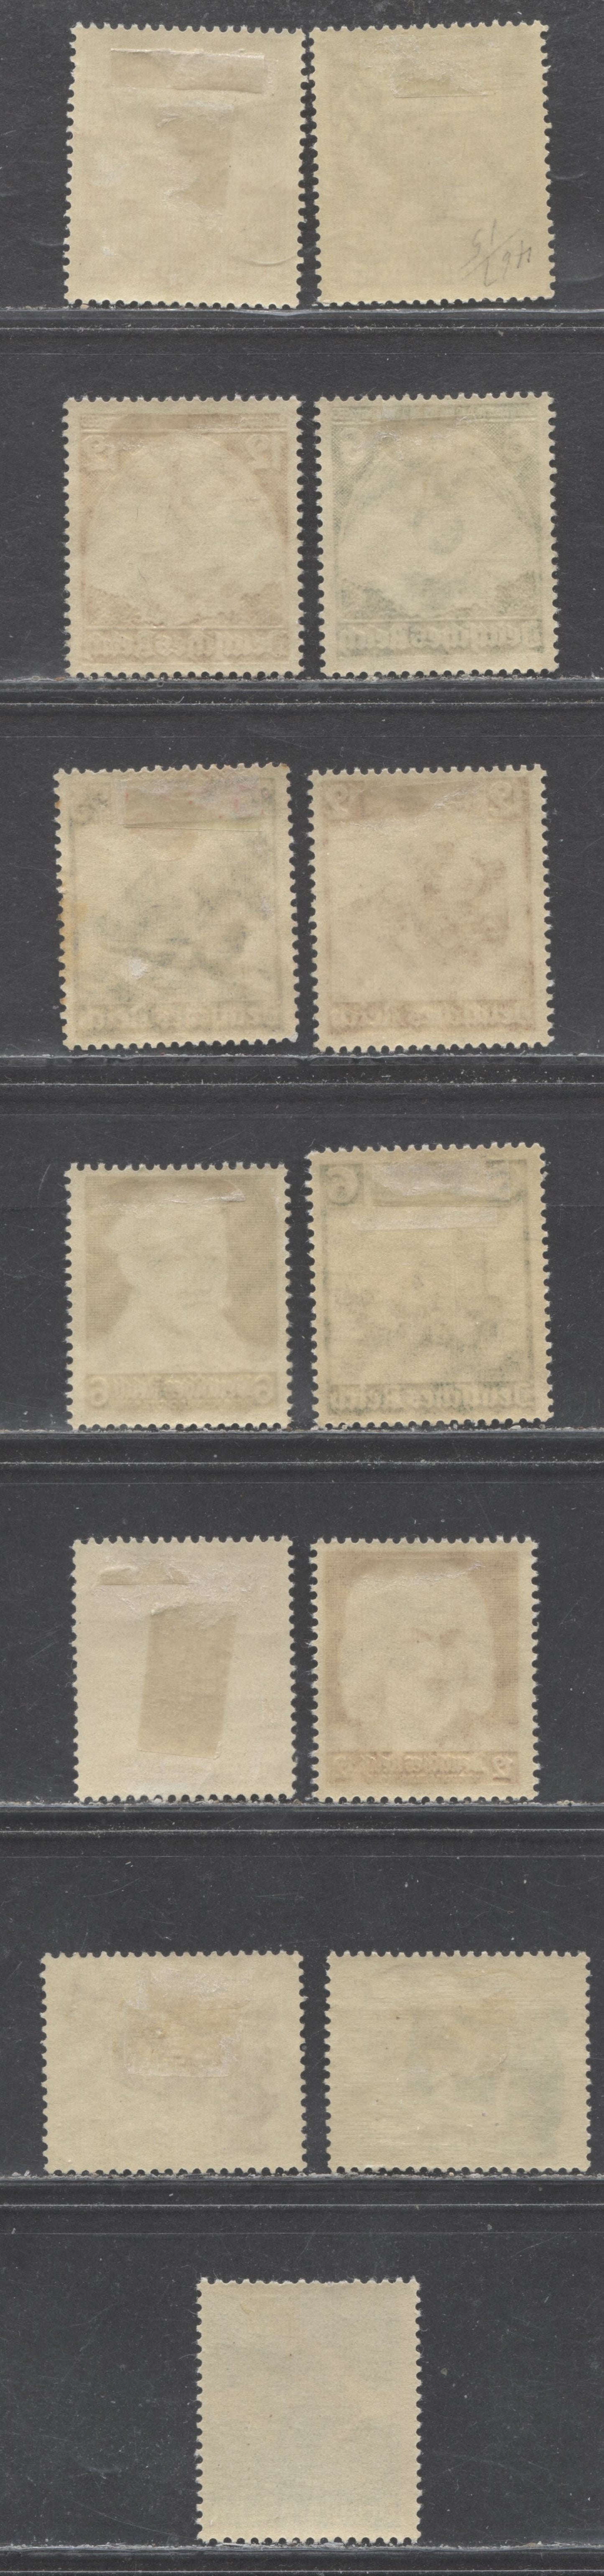 Lot 68 Germany SC#454/468 1935 Young Workers Professional Competitions - 12th Anniversary Of The Munich Putsch Issues, 13 F/VFOG Singles, Click on Listing to See ALL Pictures, Estimated Value $15